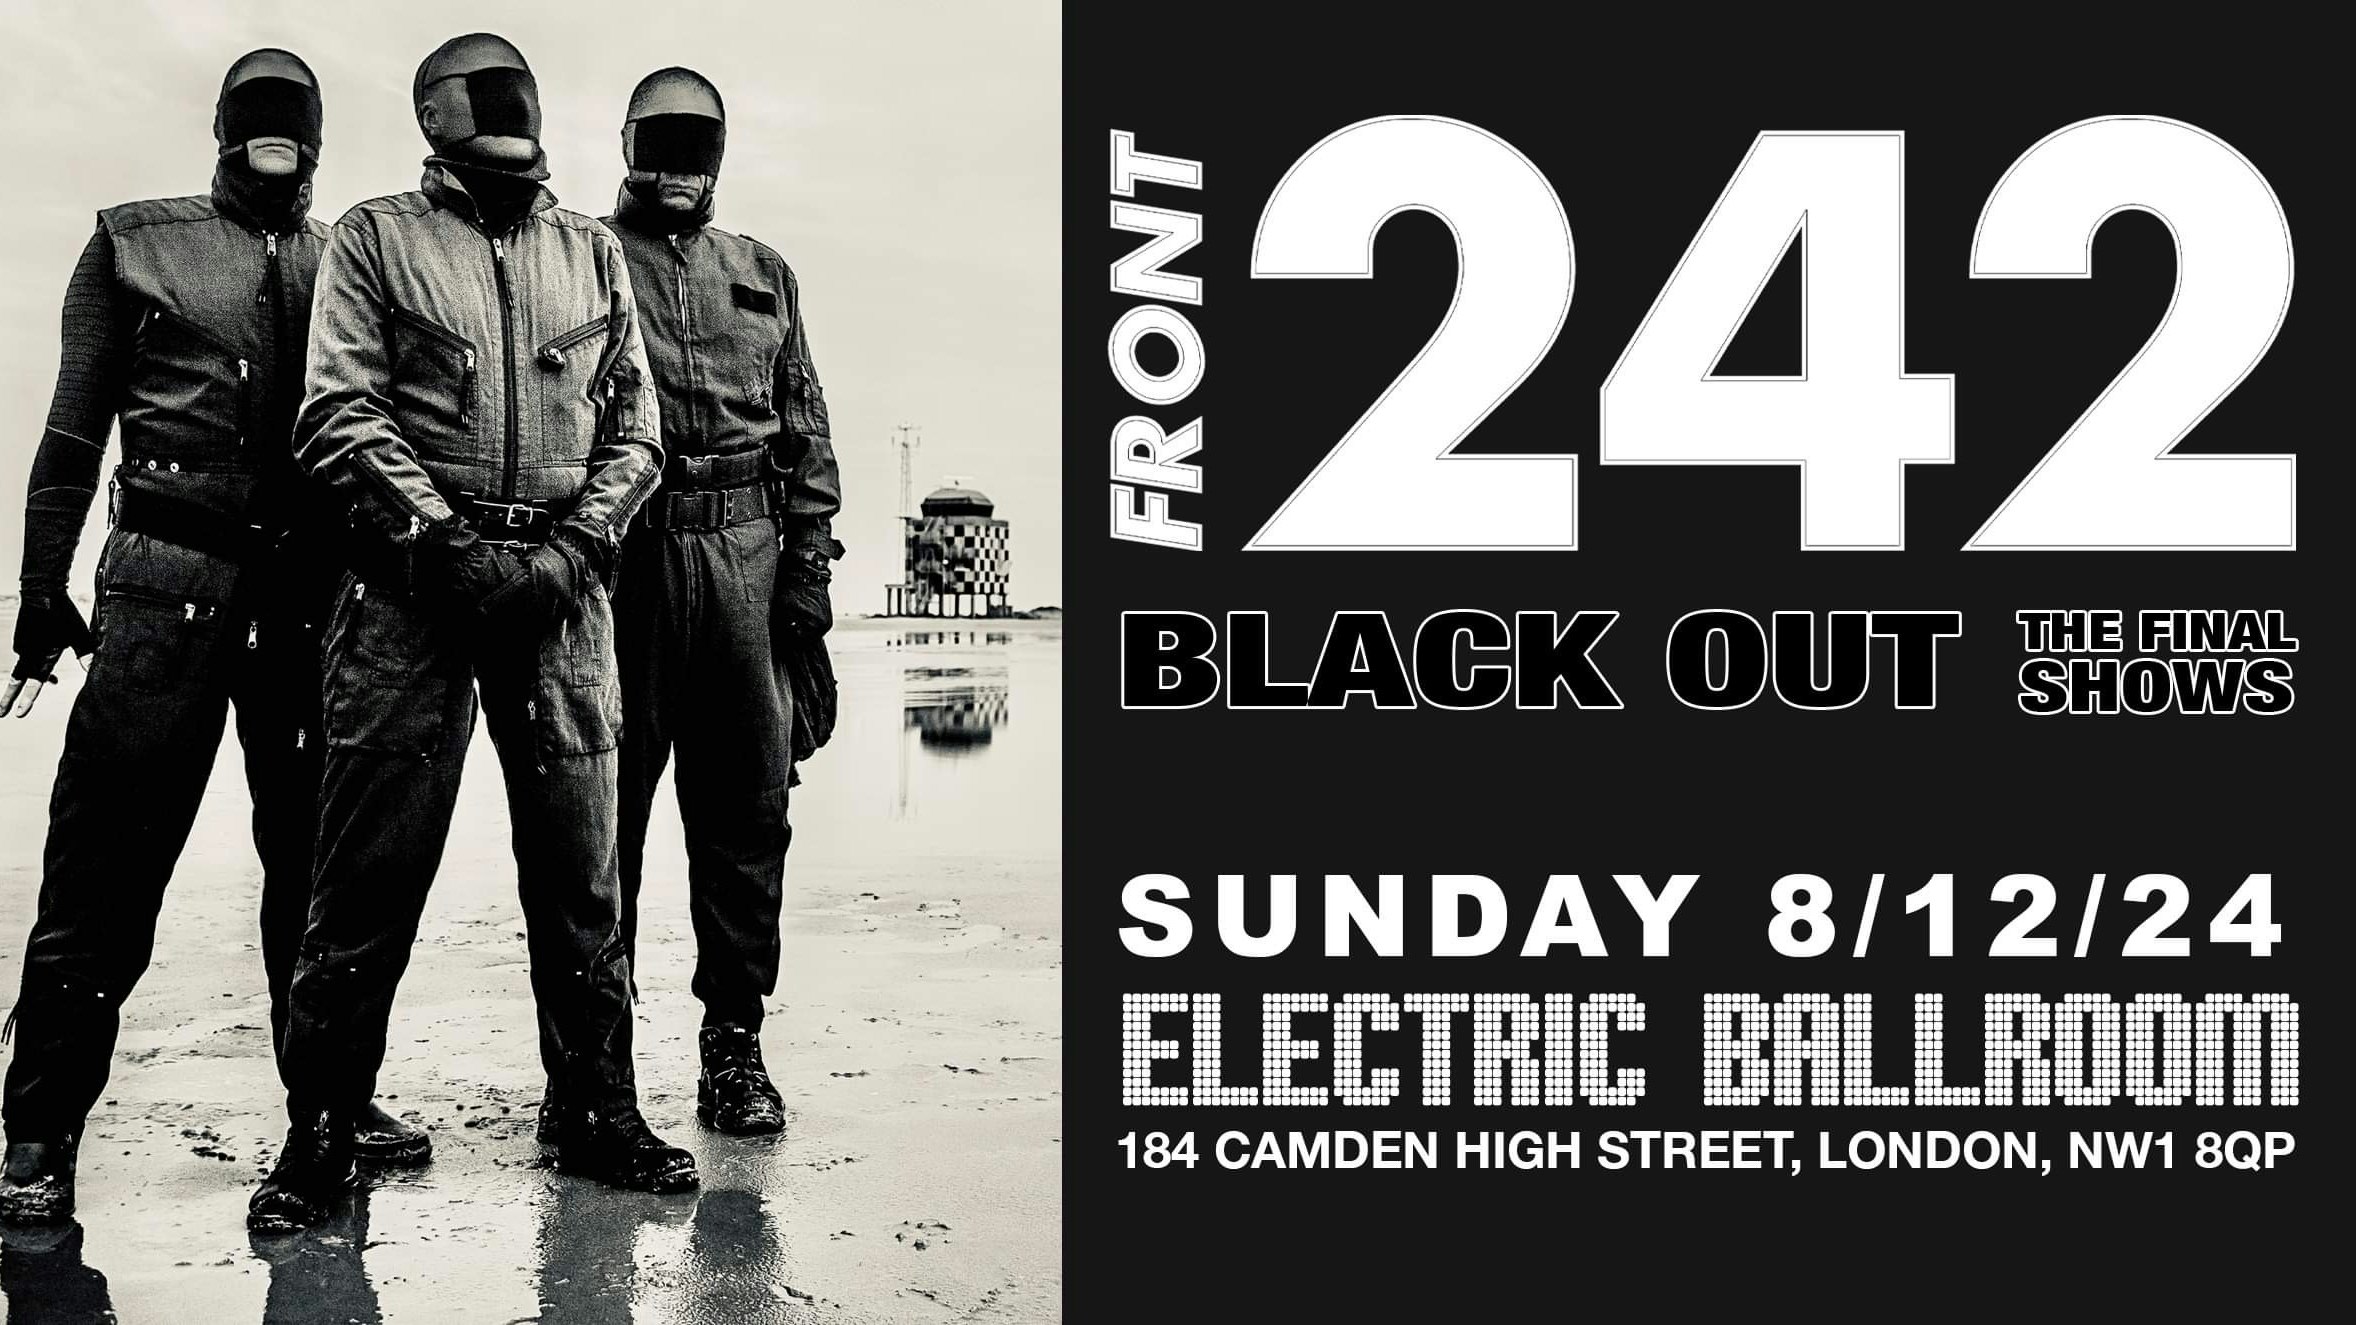 FRONT 242 BLACK OUT – Final UK Show